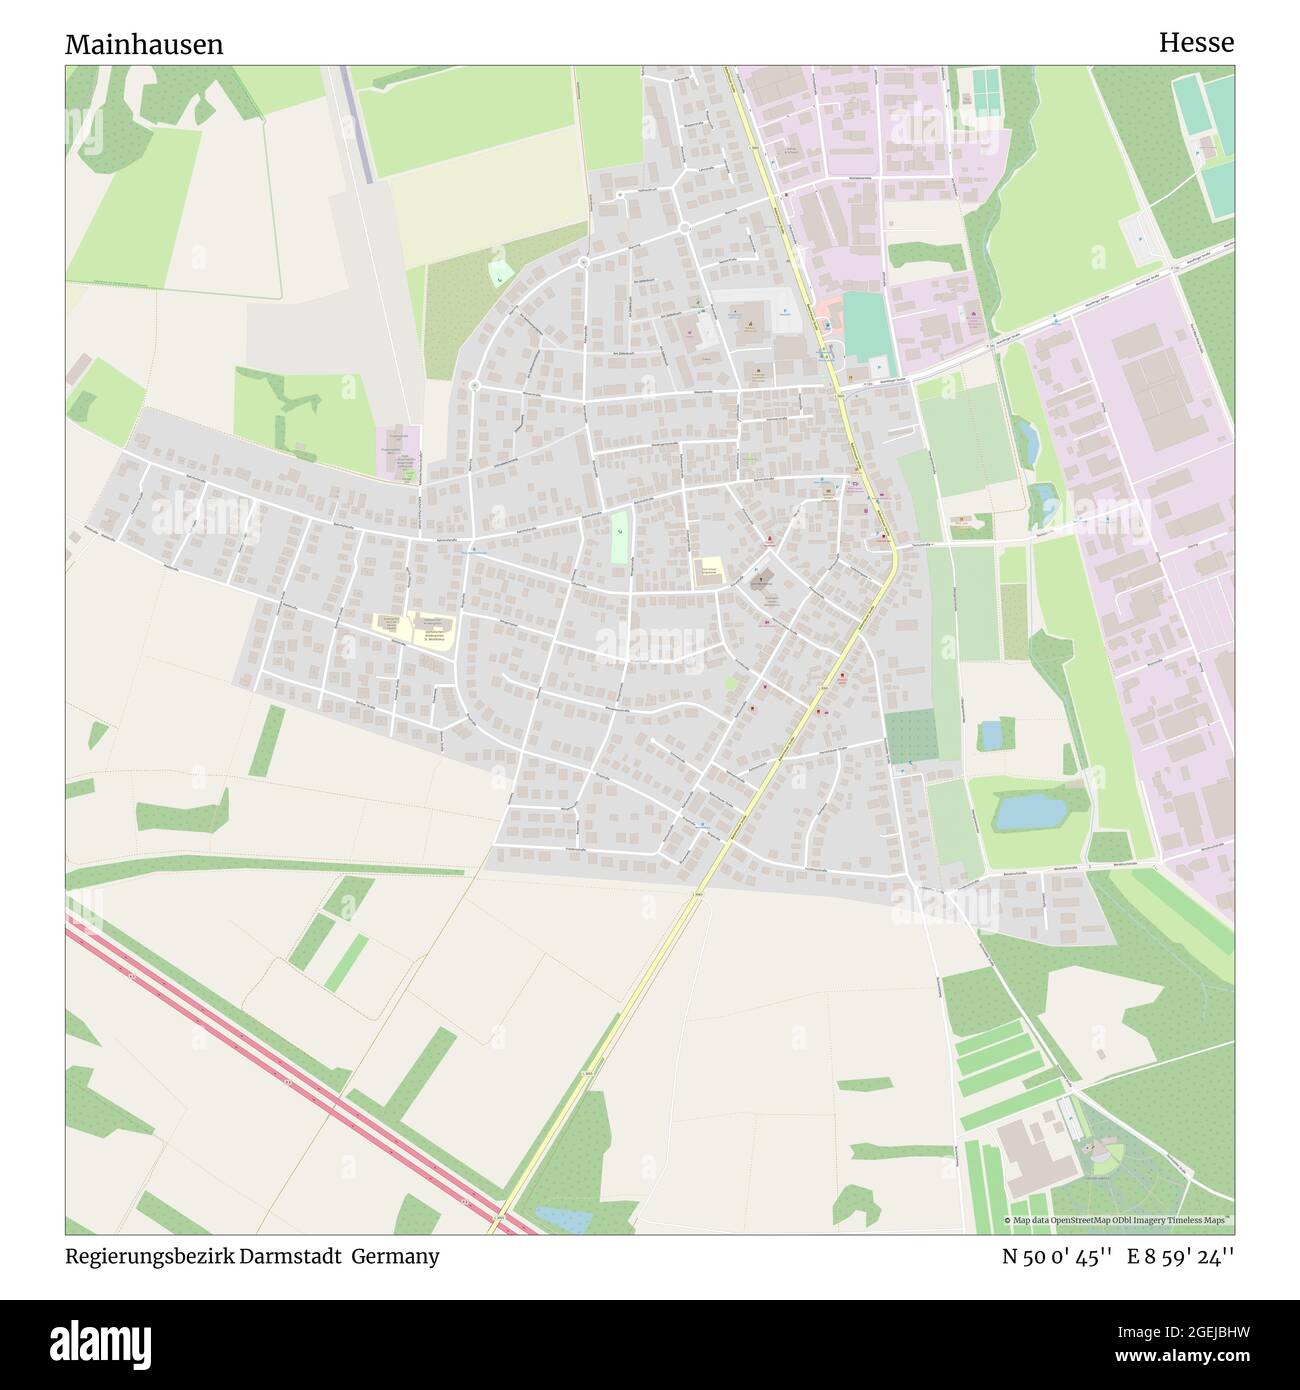 Mainhausen, Regierungsbezirk Darmstadt, Germany, Hesse, N 50 0' 45'', E 8 59' 24'', map, Timeless Map published in 2021. Travelers, explorers and adventurers like Florence Nightingale, David Livingstone, Ernest Shackleton, Lewis and Clark and Sherlock Holmes relied on maps to plan travels to the world's most remote corners, Timeless Maps is mapping most locations on the globe, showing the achievement of great dreams Stock Photo